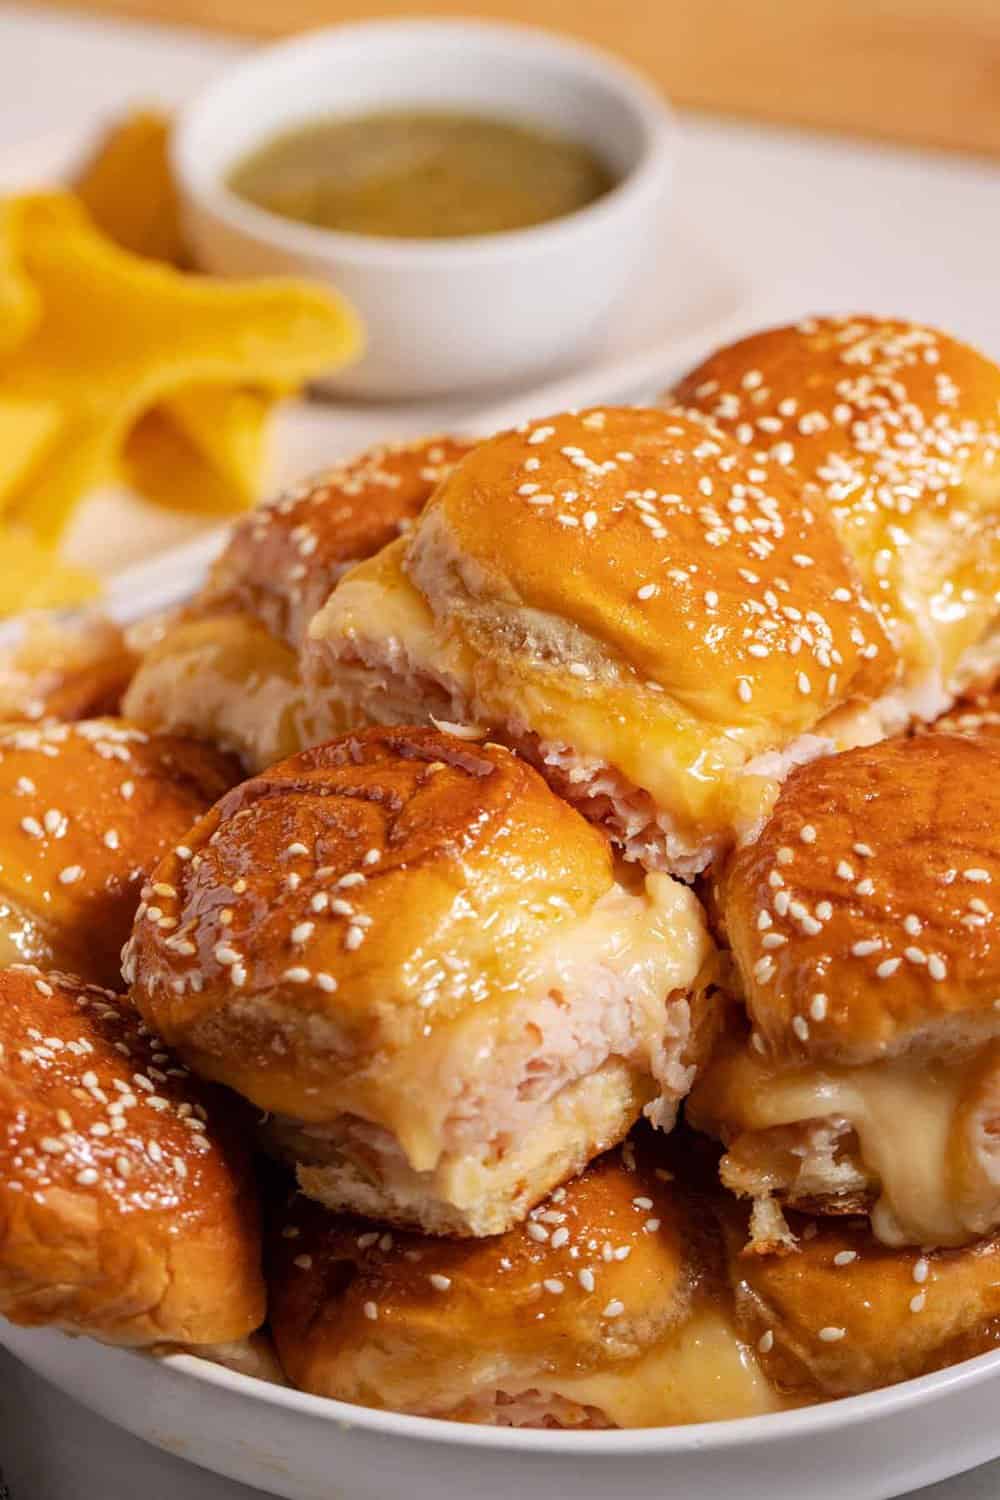 Bowl of stacked turkey sliders.